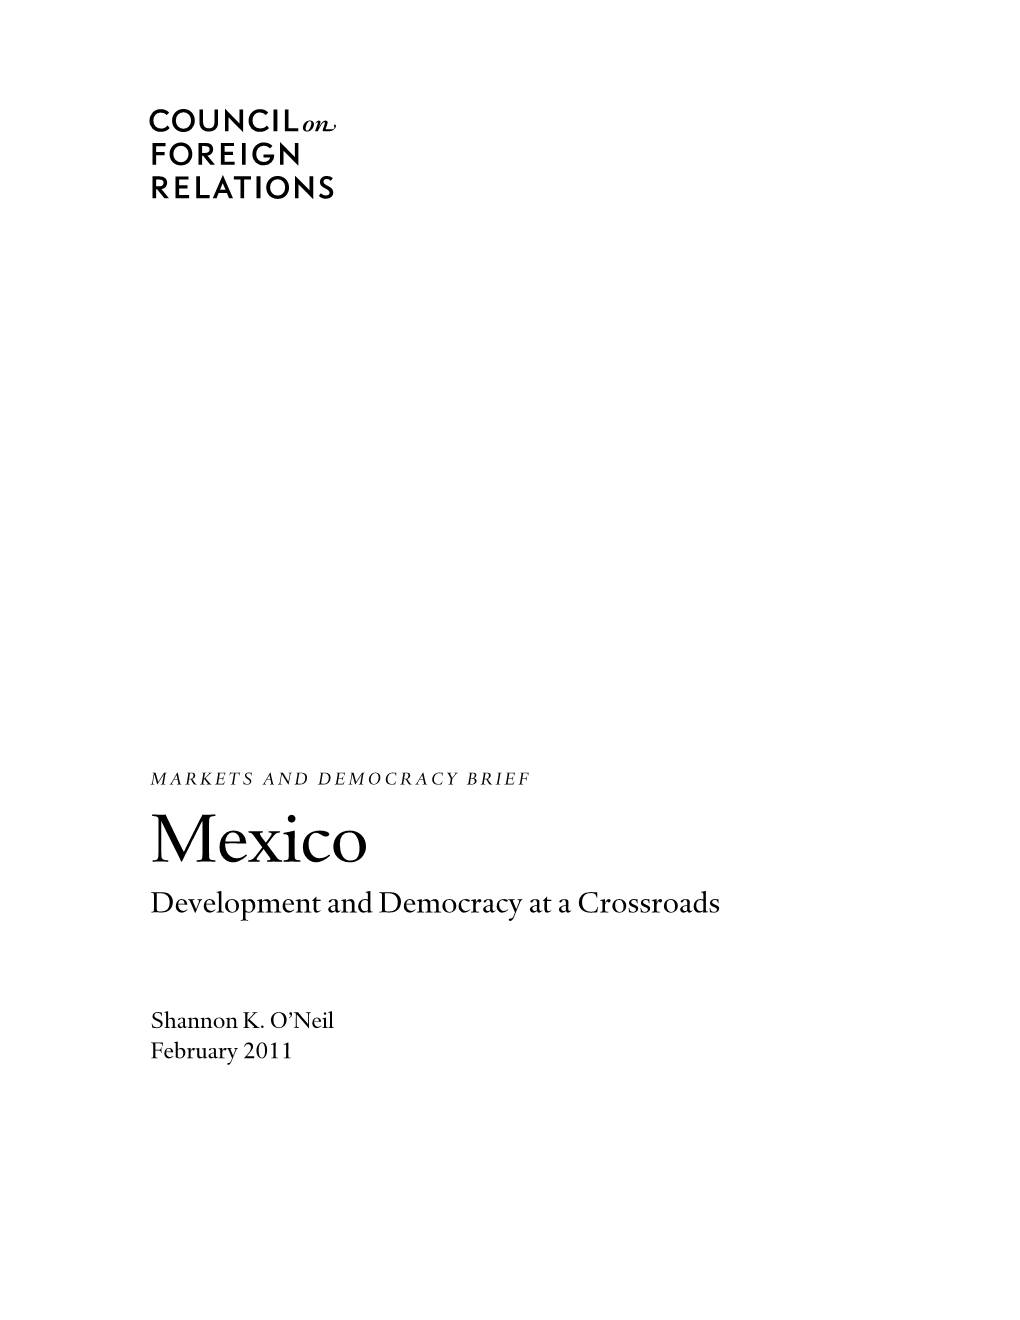 Mexico: Development and Democracy at a Crossroads